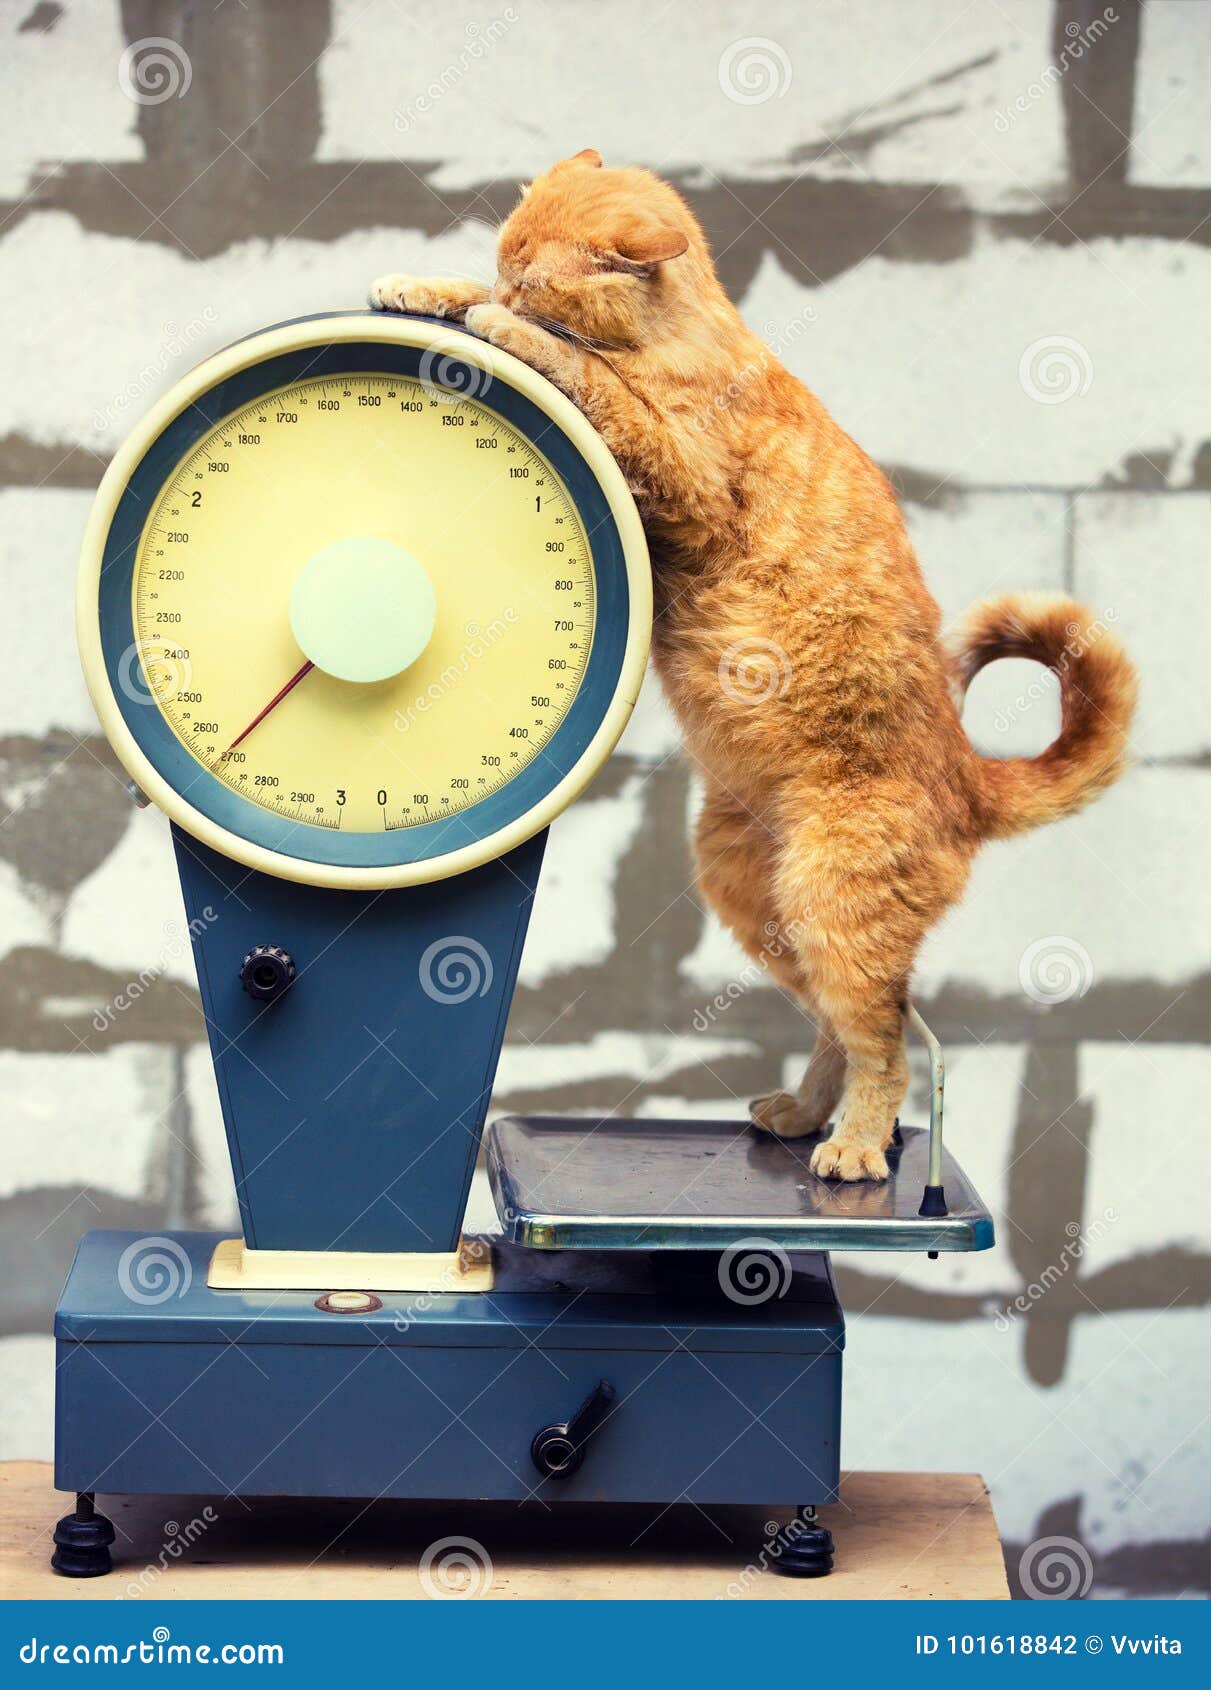 https://thumbs.dreamstime.com/z/cat-standing-scales-weigh-control-healthy-body-weight-101618842.jpg